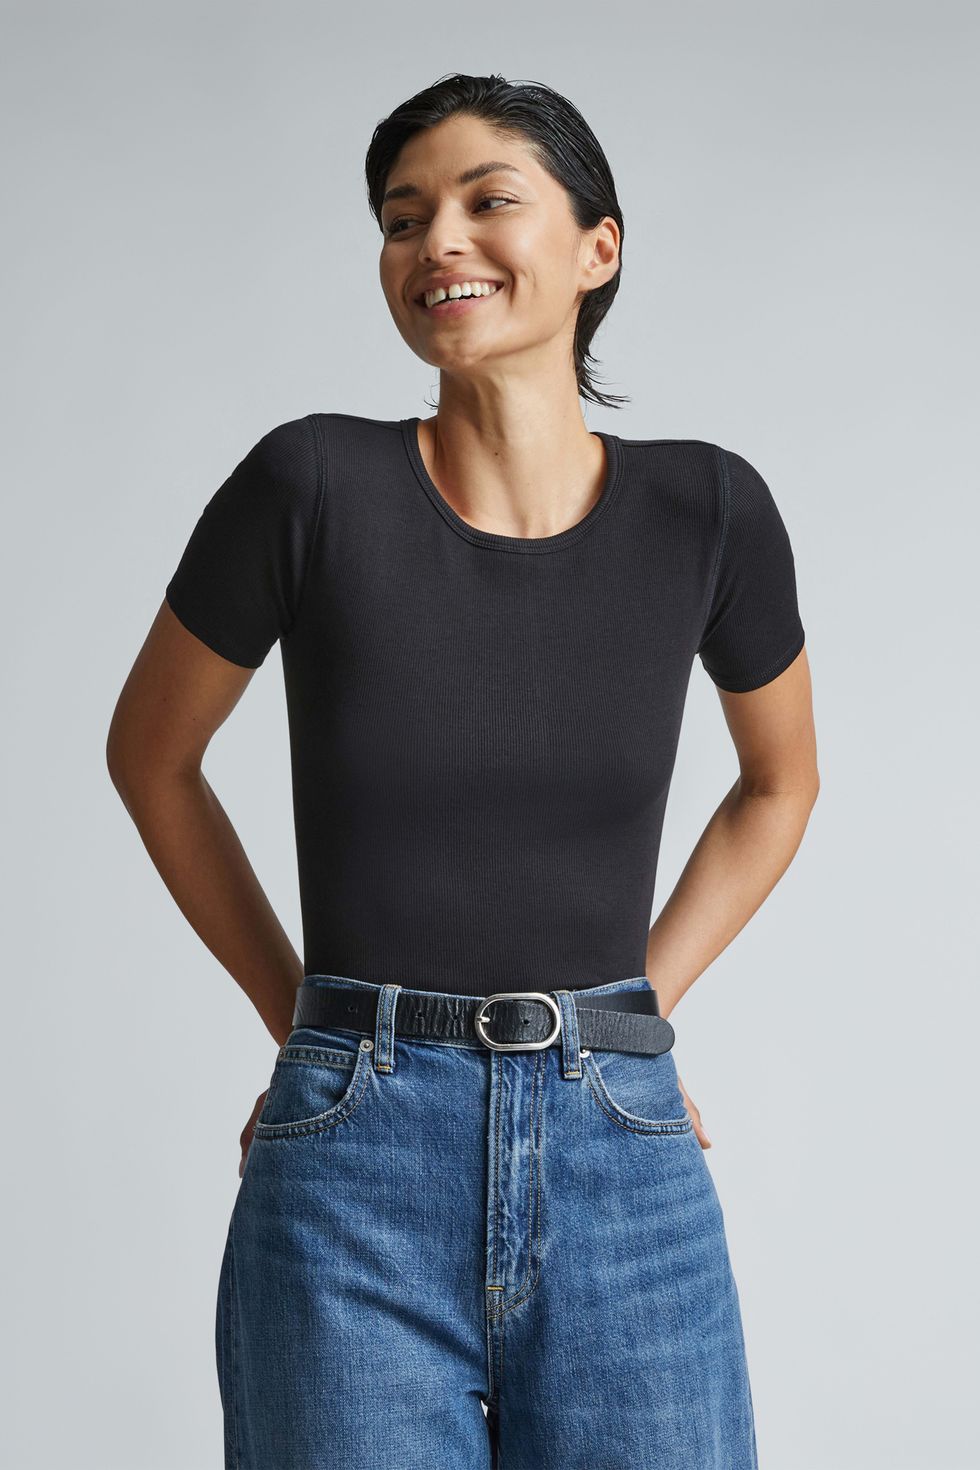 15 Best Black T-shirts for Women to Buy Online in Australia  Checkout –  Best Deals, Expert Product Reviews & Buying Guides